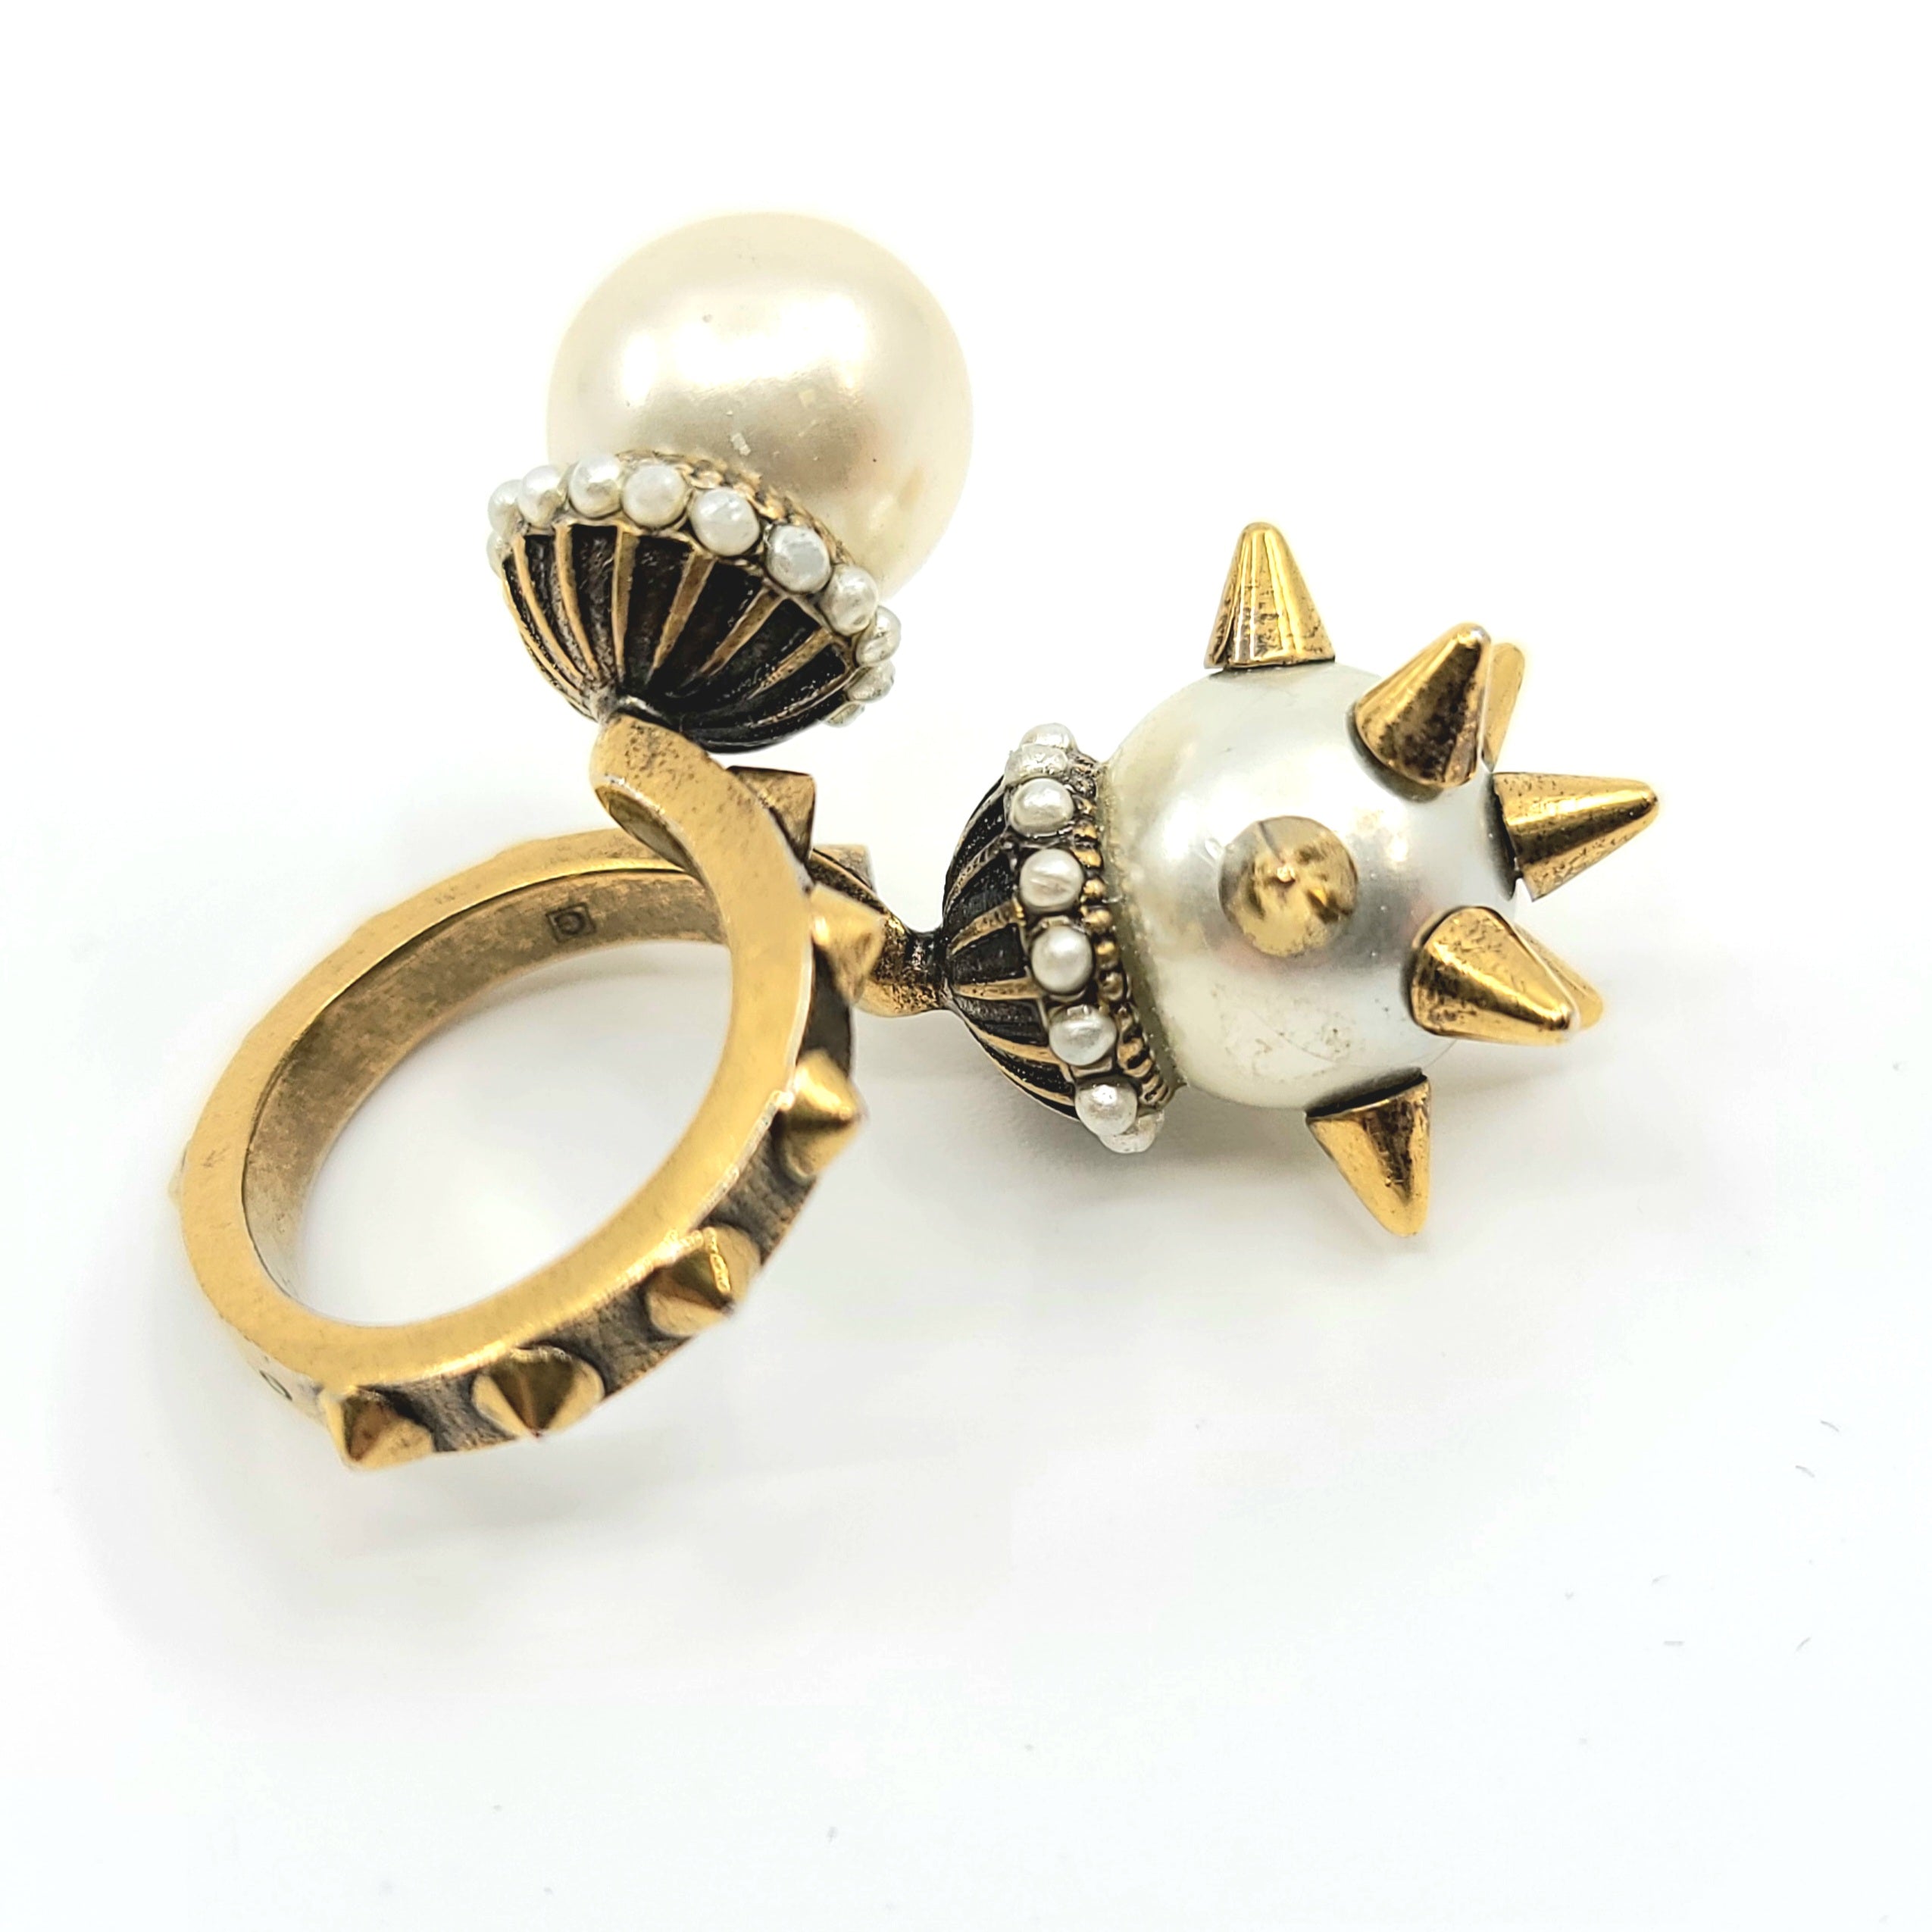 NEW GUCCI RING WITH DOUBLE GLASS PEARLS & SPIKES – 